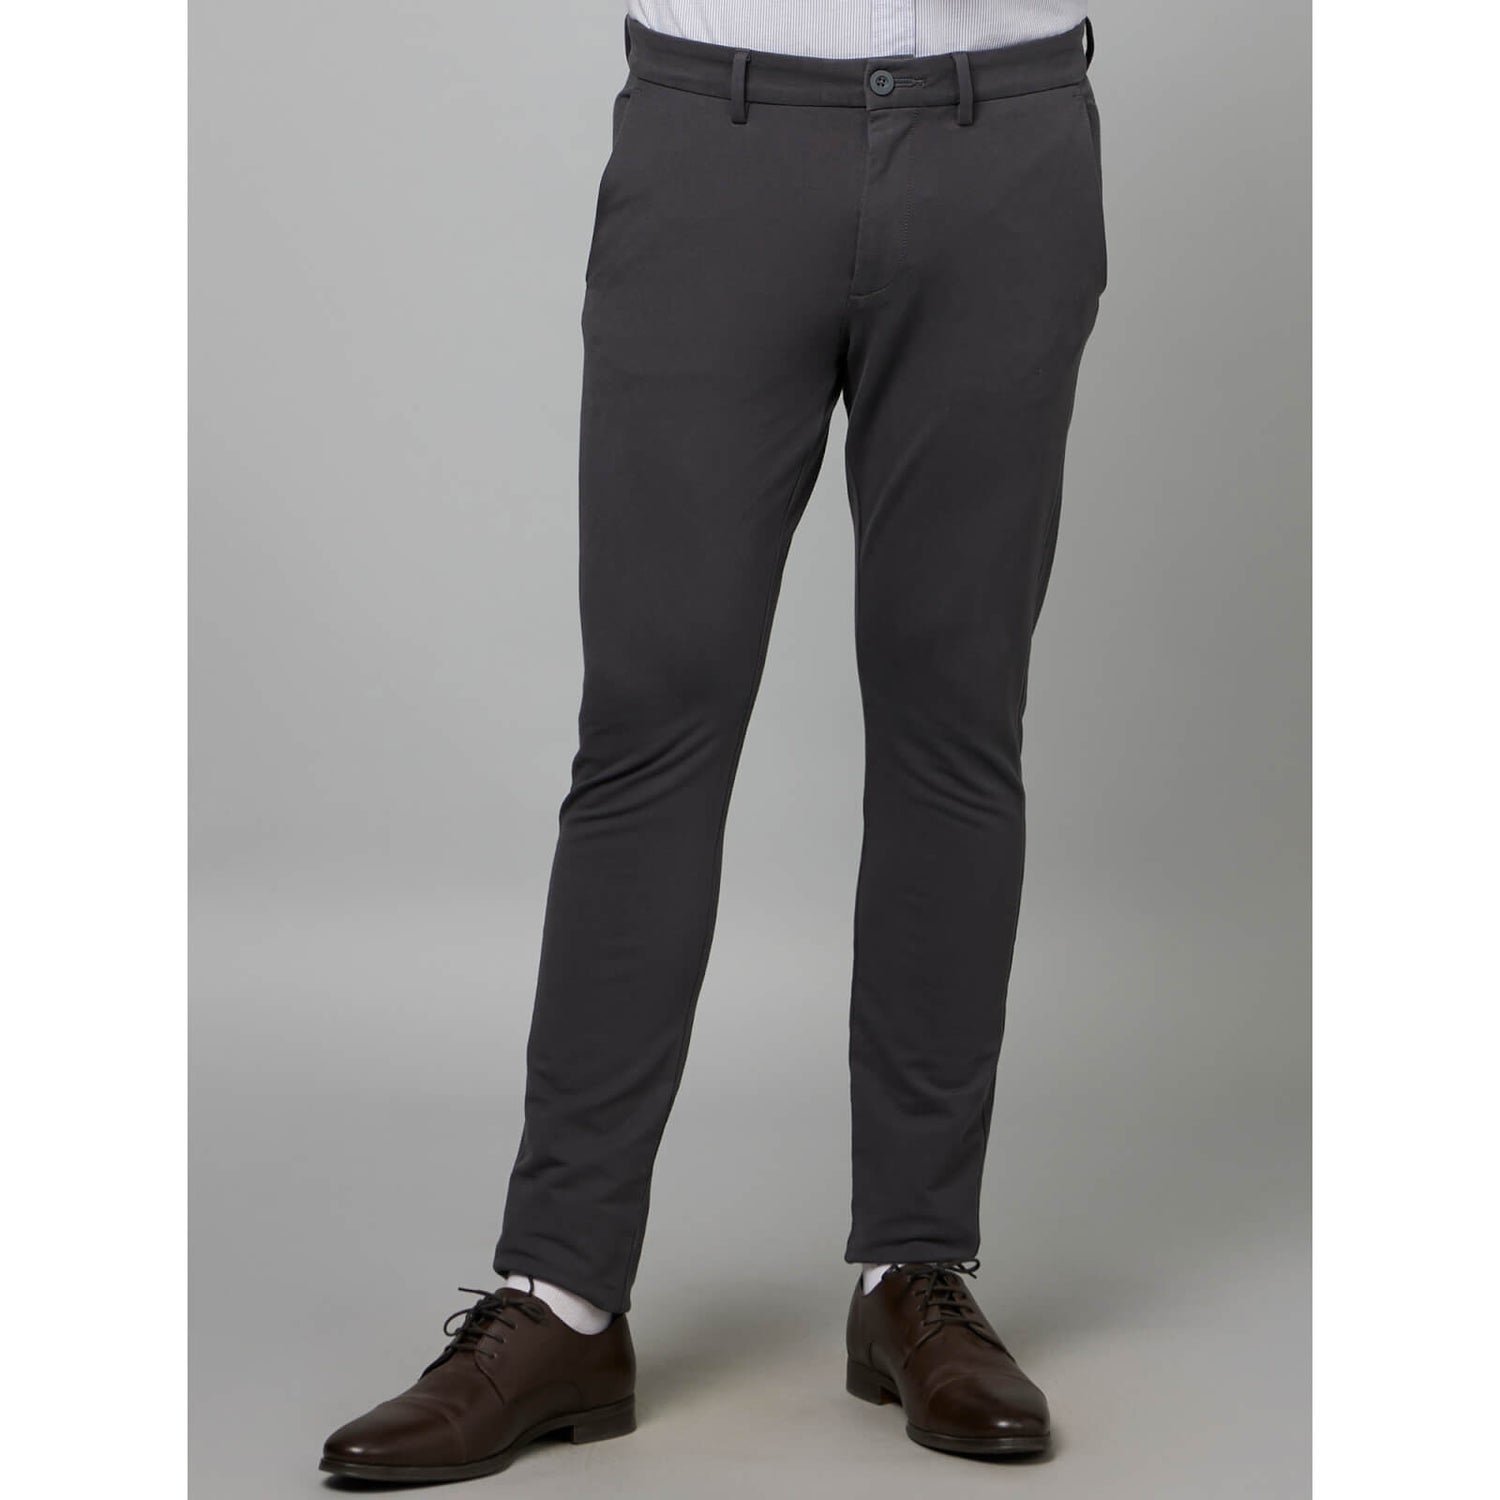 Buy Mens Charcoal Grey Power Stretch Pants Online In India